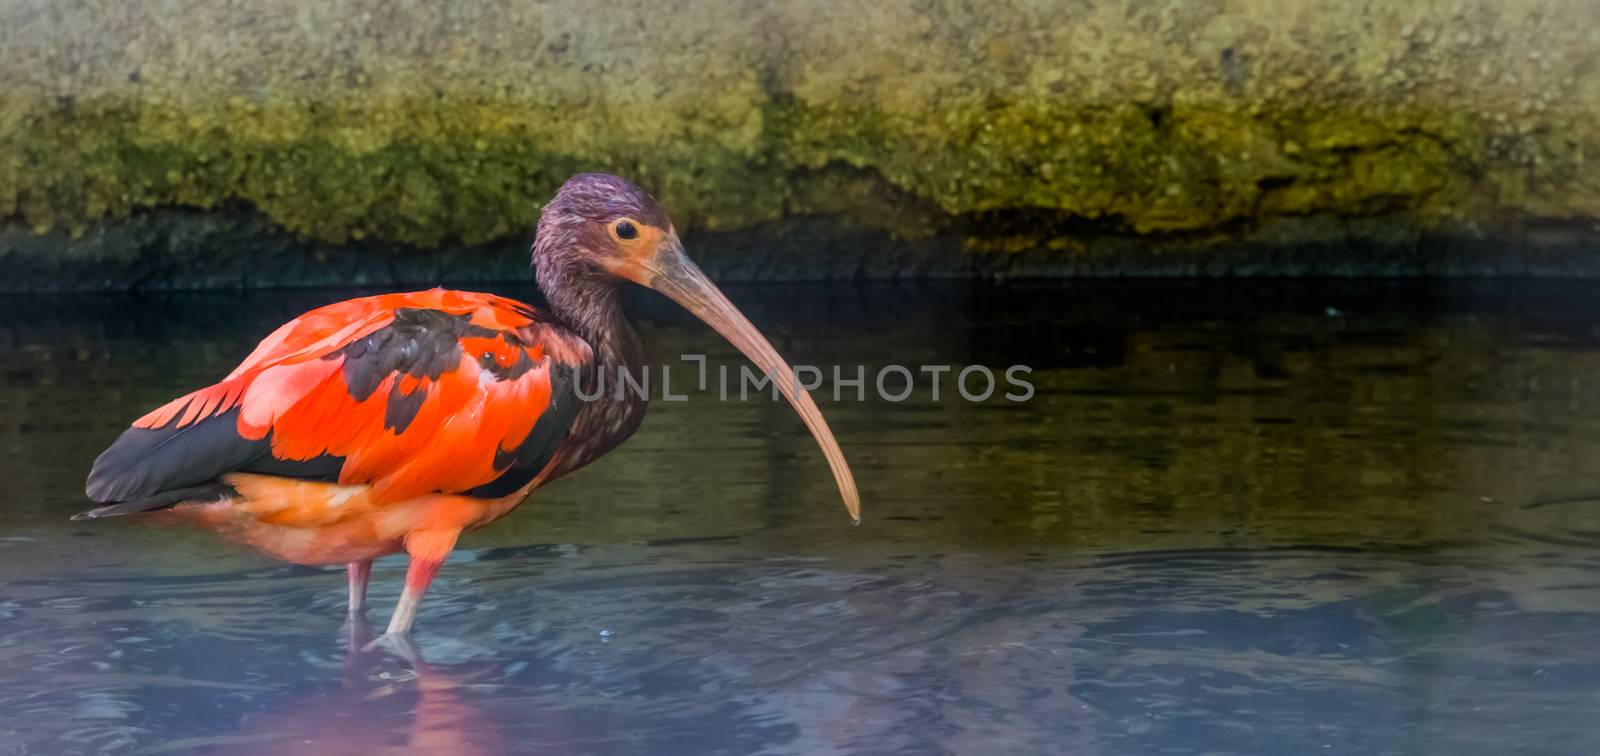 young juvenile red scarlet ibis standing in the water, colorful tropical bird specie from Africa